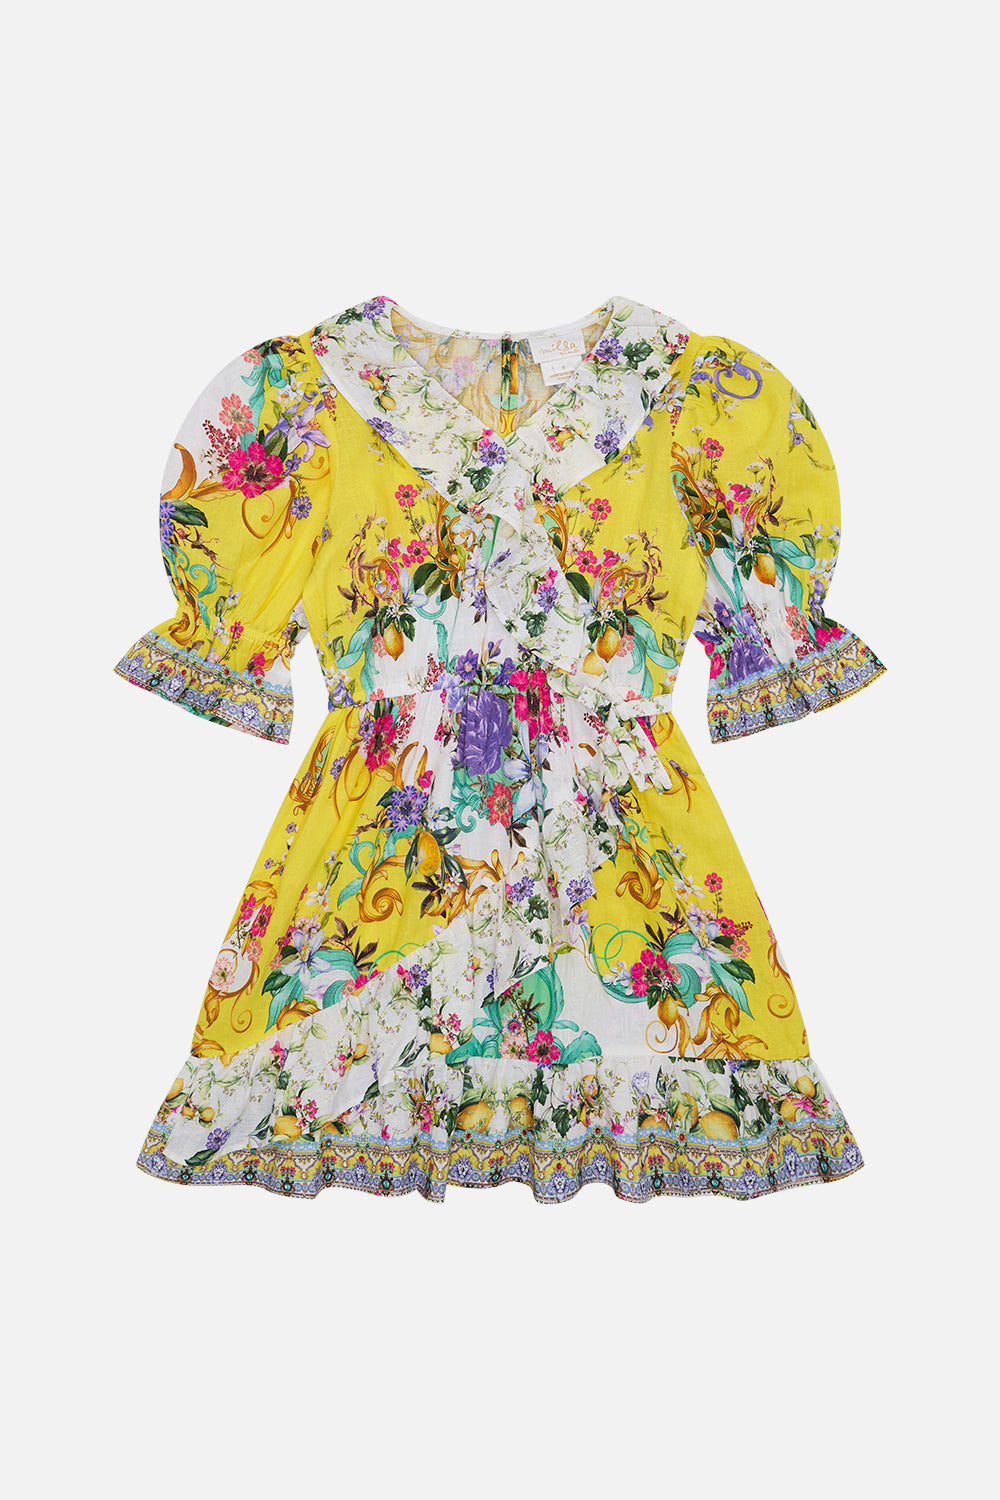 Product view of MILLA BY CAMILLA kids floral dress in Caterina Spritz print